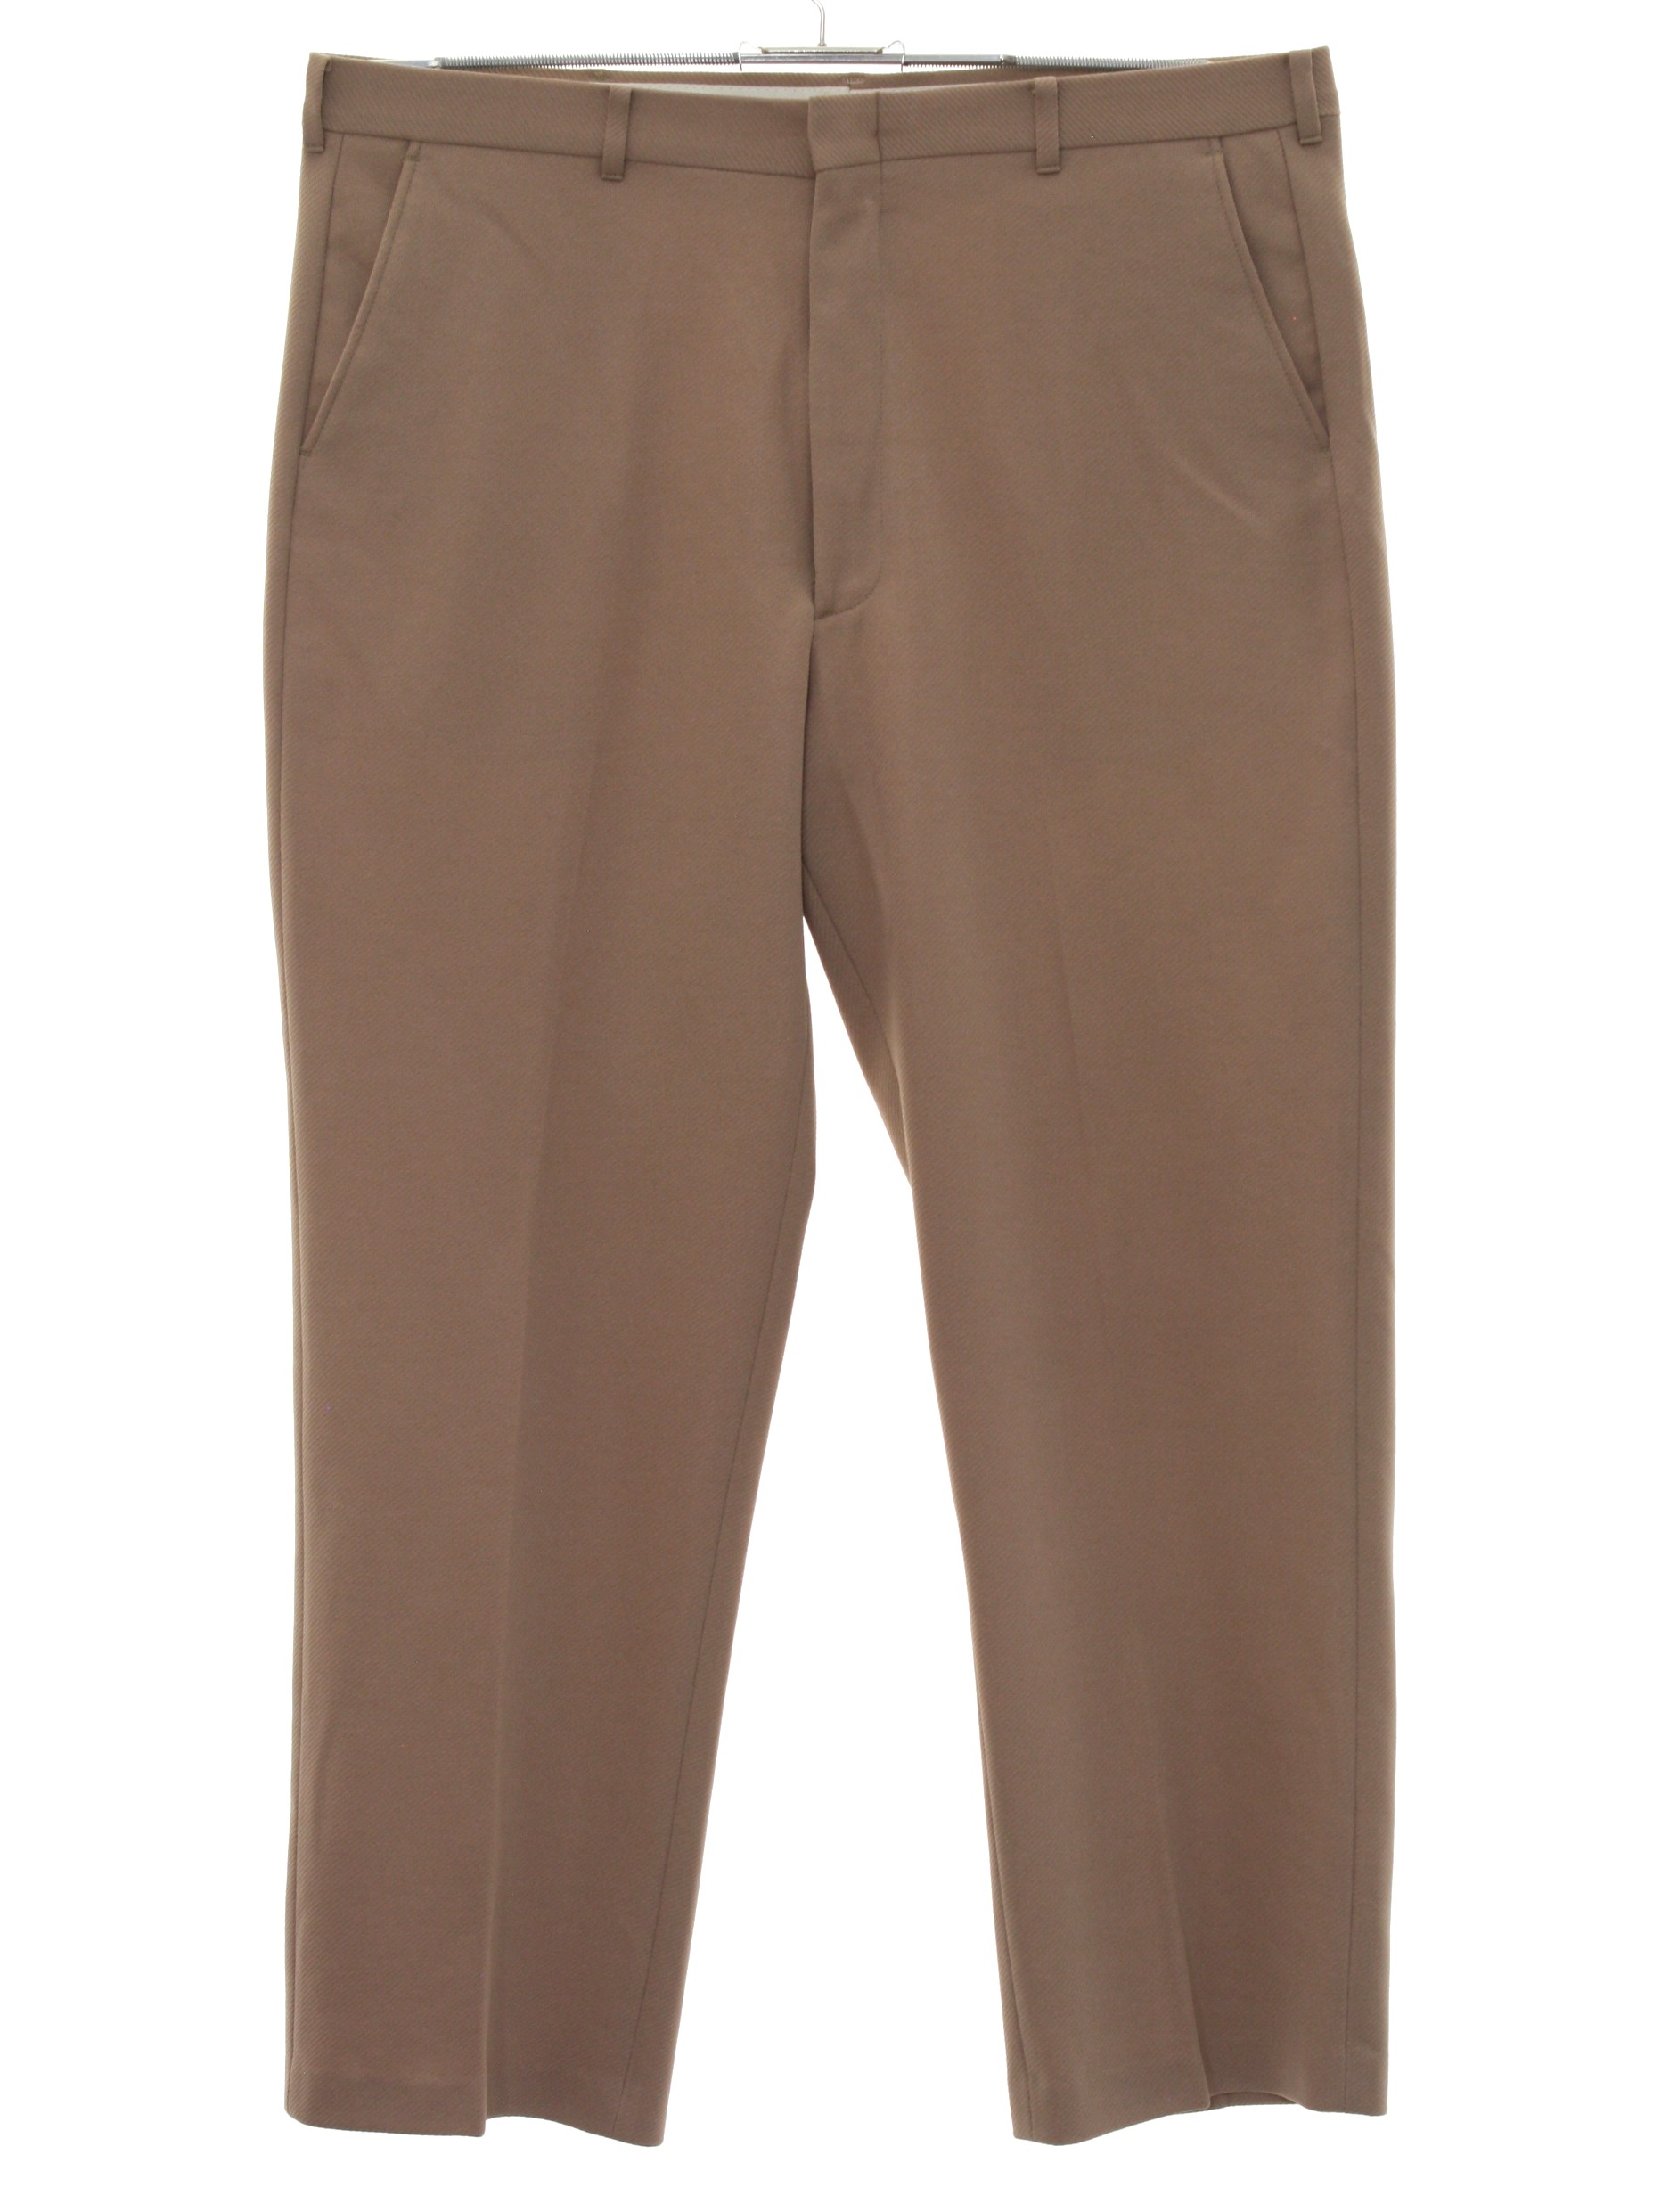 Vintage 80s Pants: 80s -Haband- Mens tan solid colored polyester flat ...